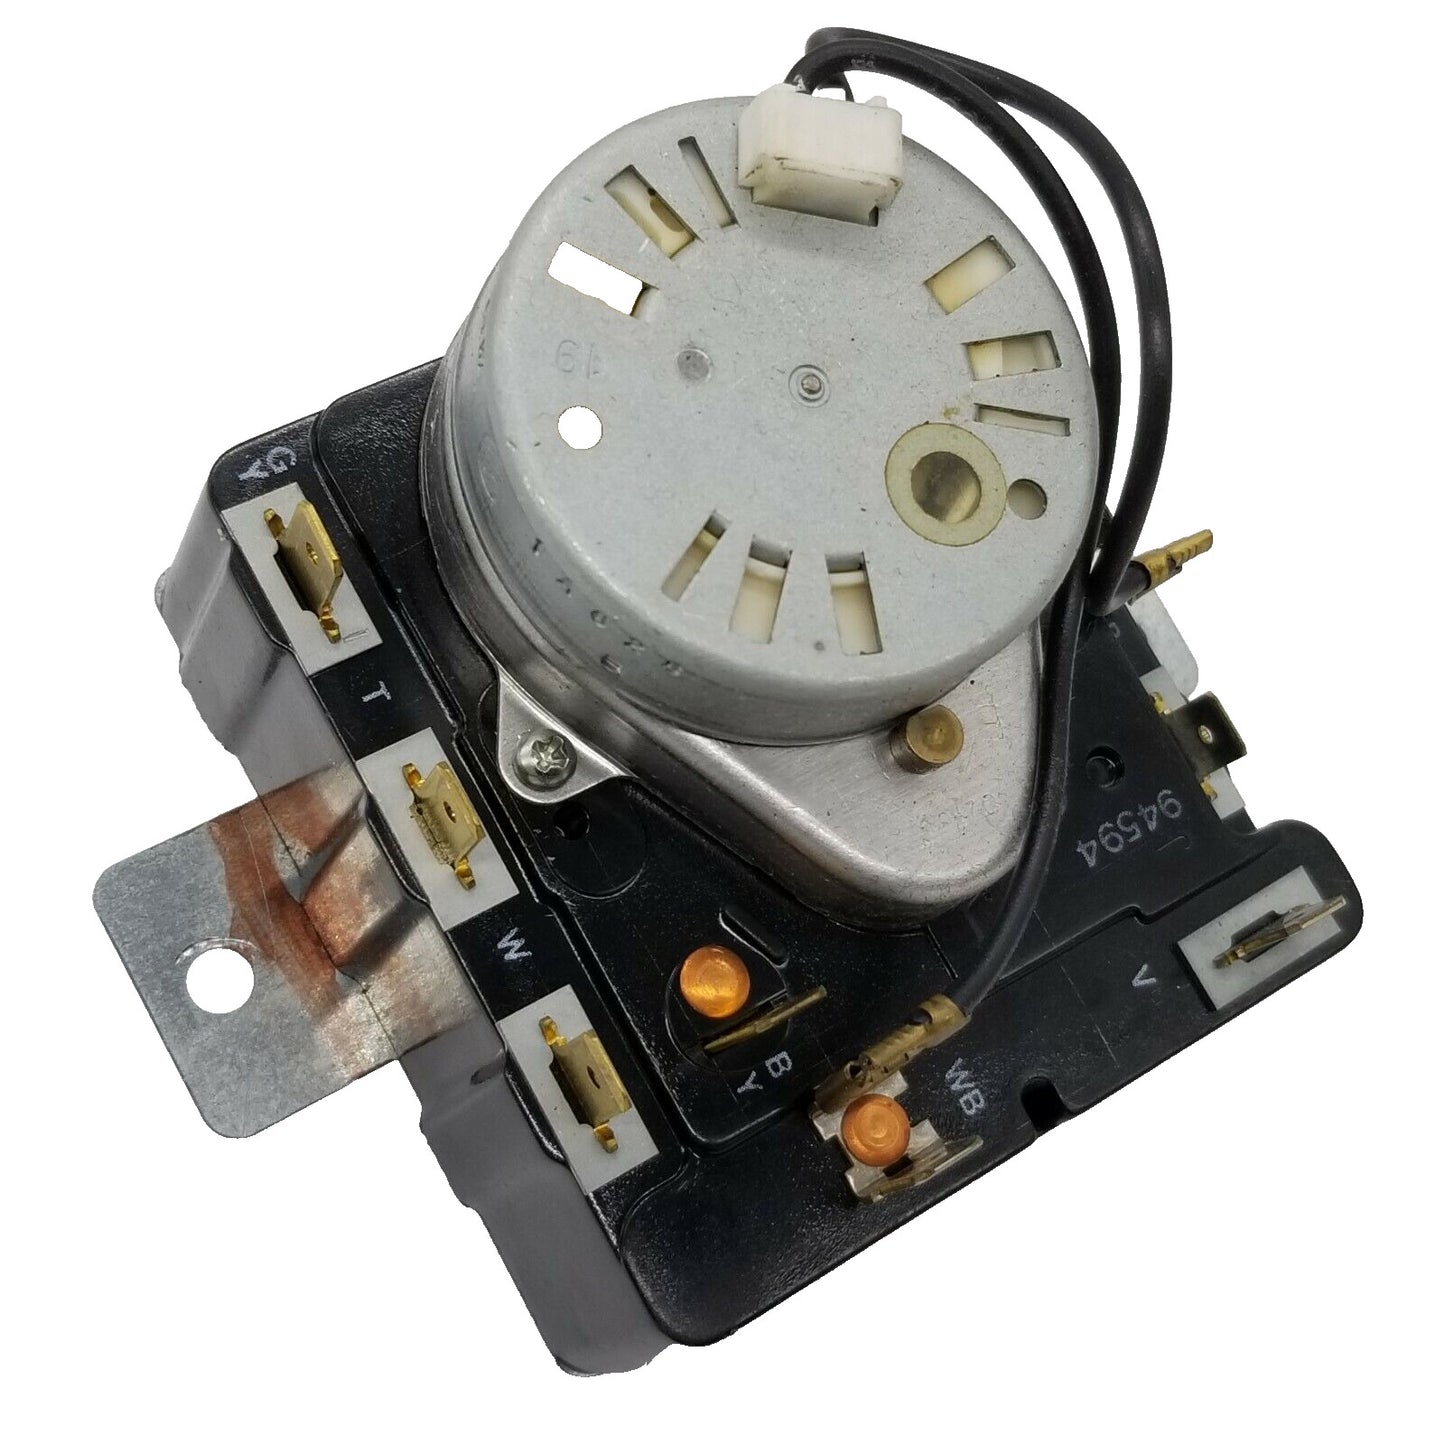 Genuine OEM Replacement for Kenmore Dryer Timer 3406015